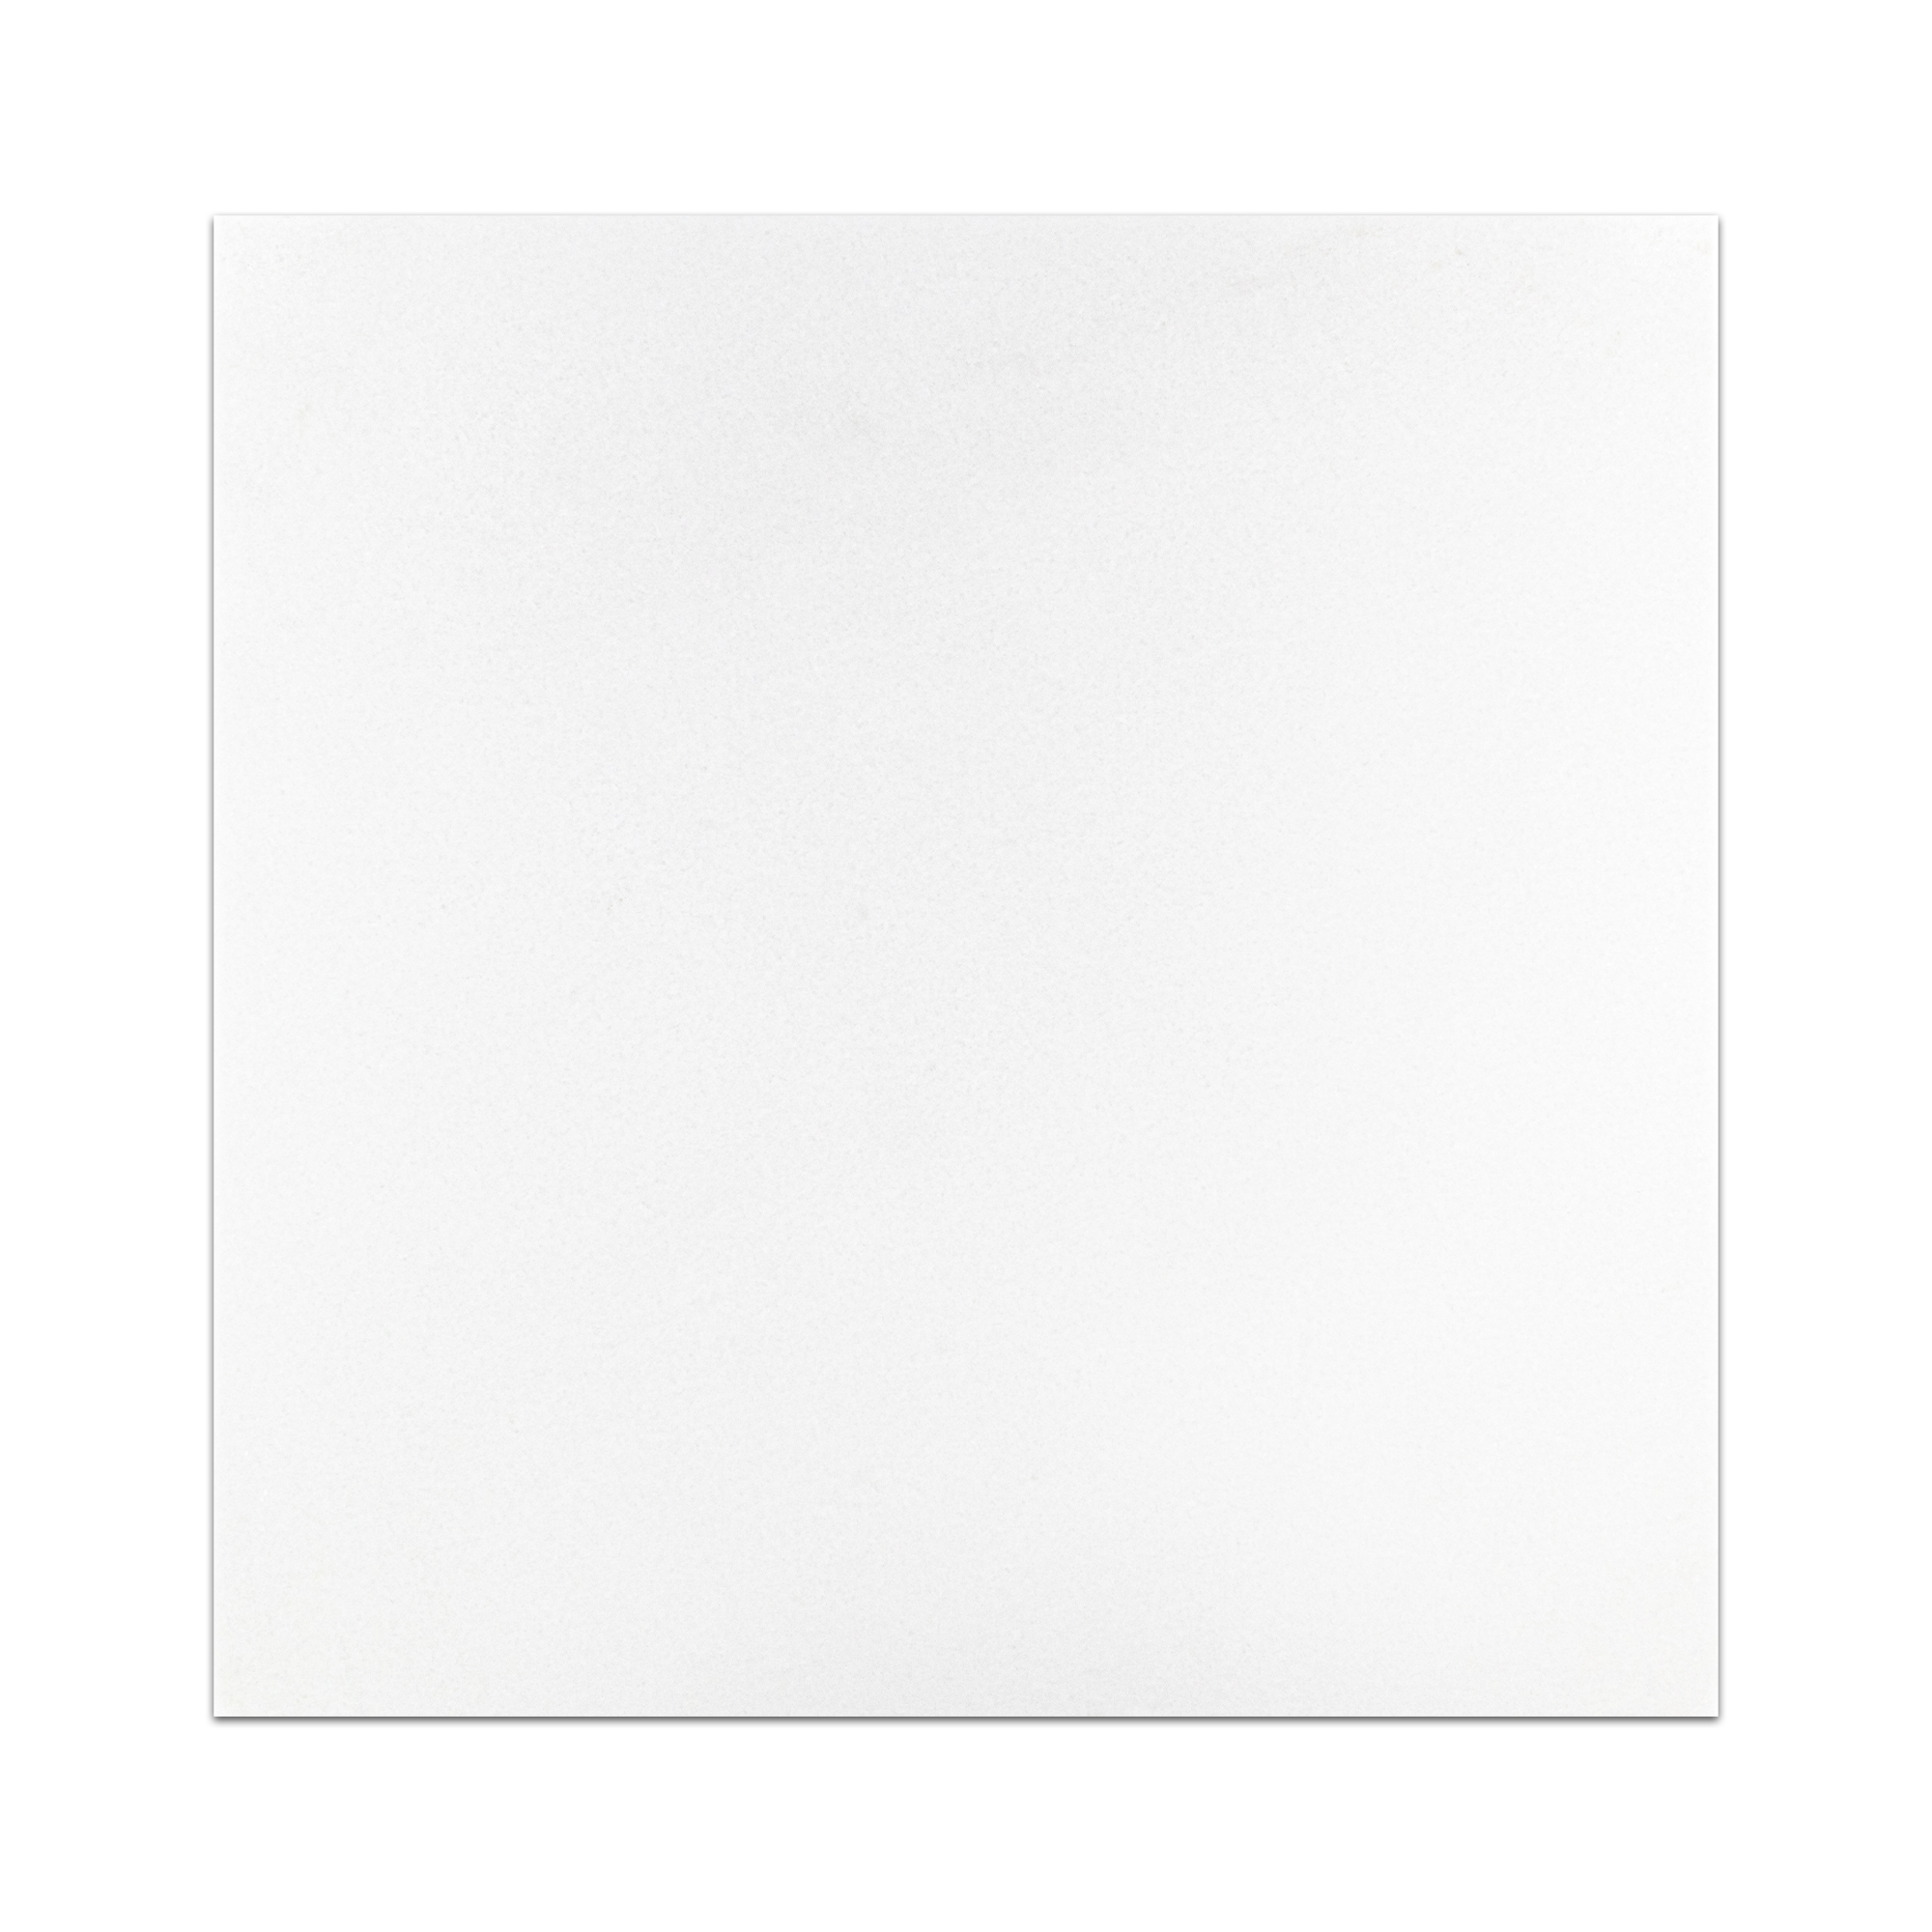 Elon White Thassos Marble Square Field Tile 12x12x0.375 Honed - Surface Group International